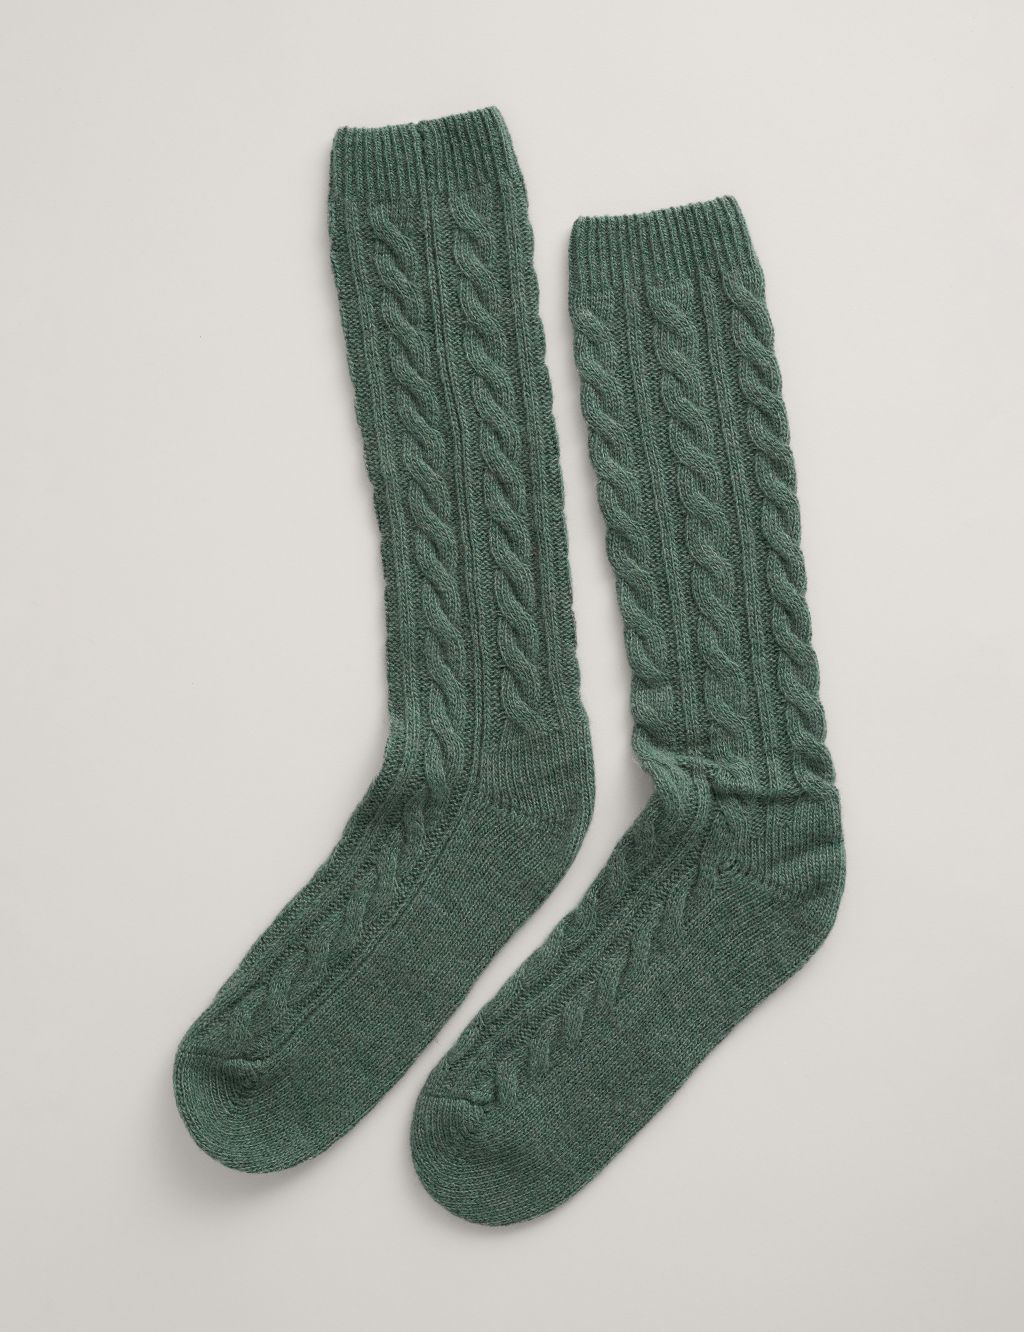 Wool Blend Cable Knit Ankle High Socks image 1